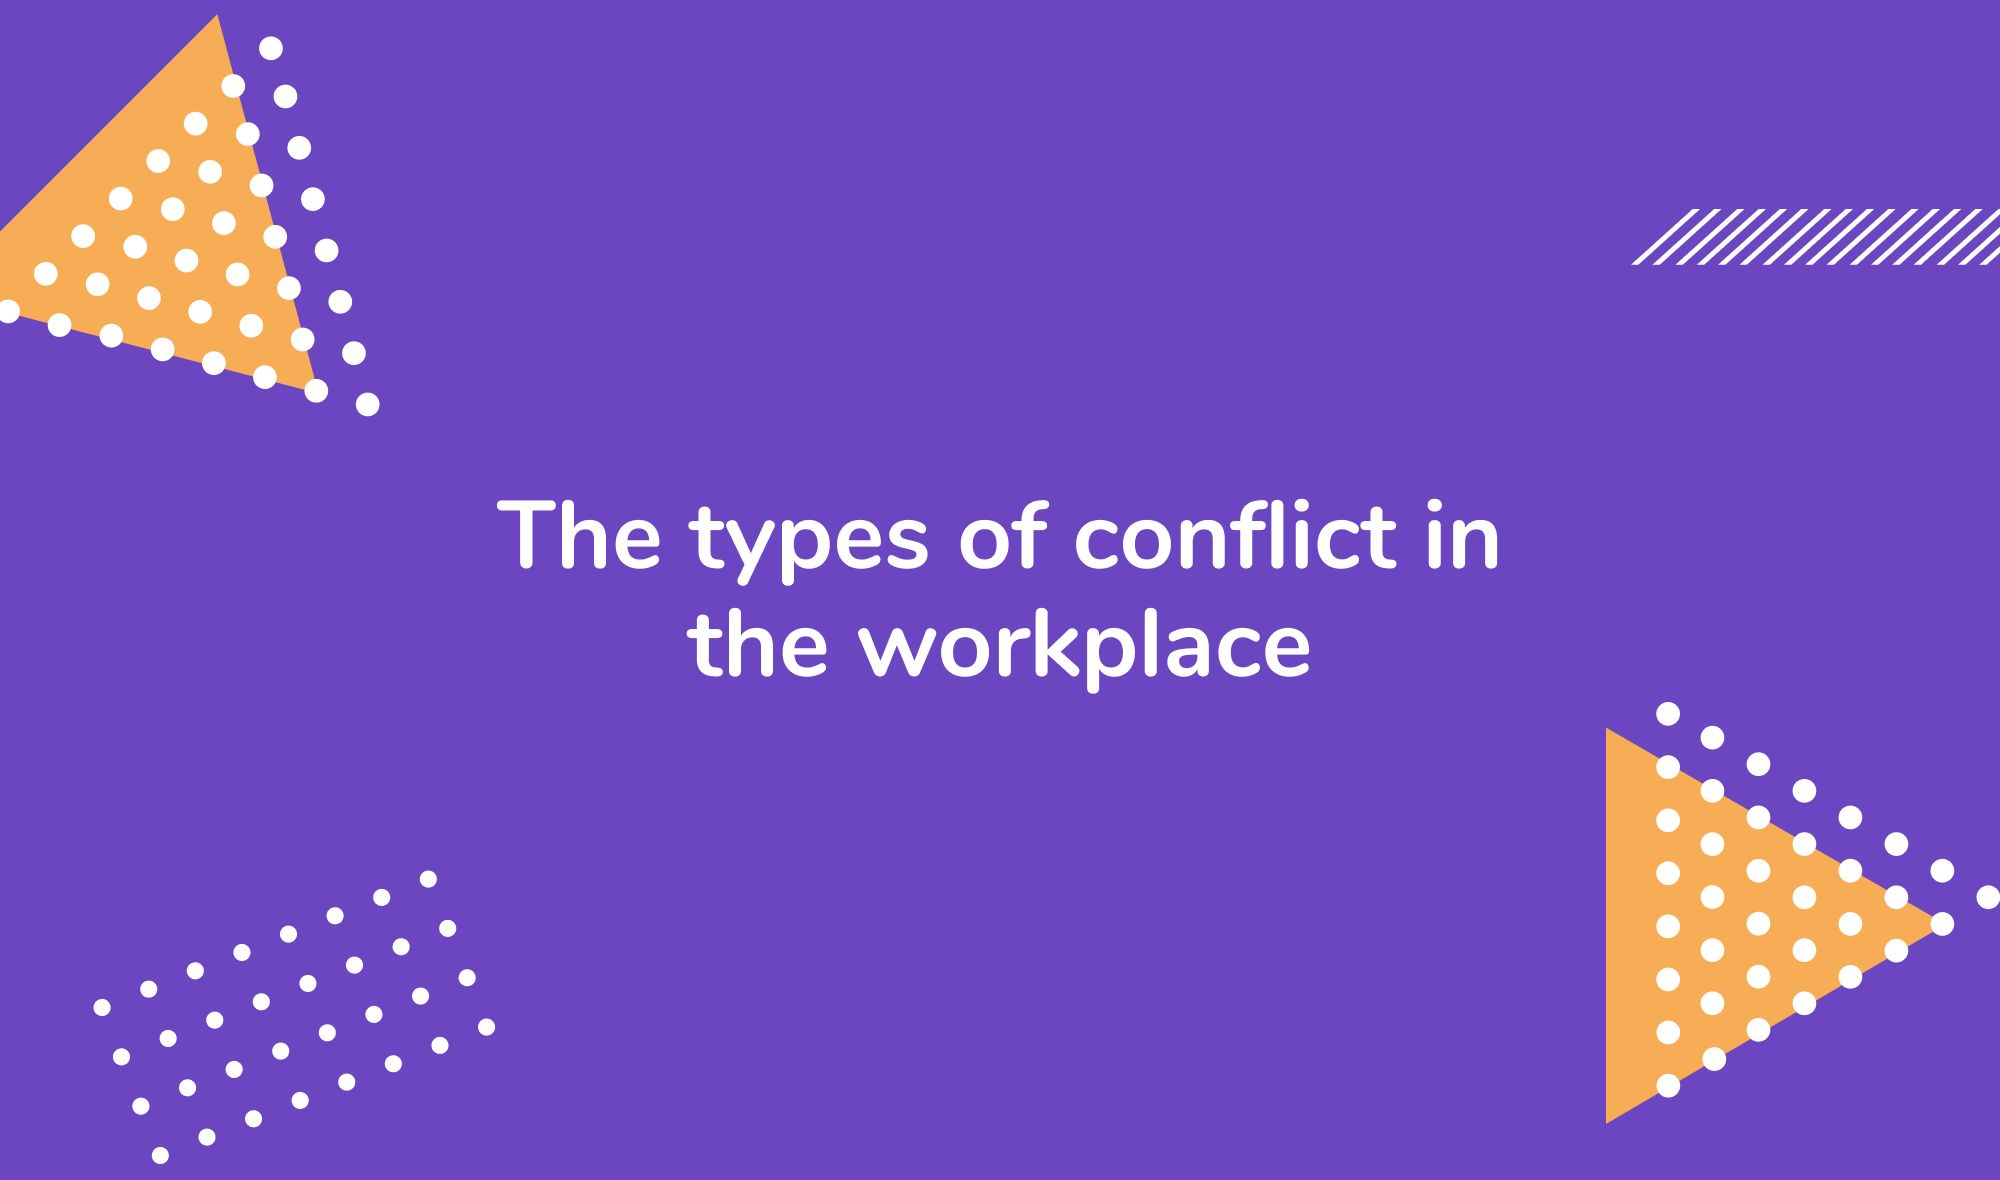 The types of conflict in the workplace